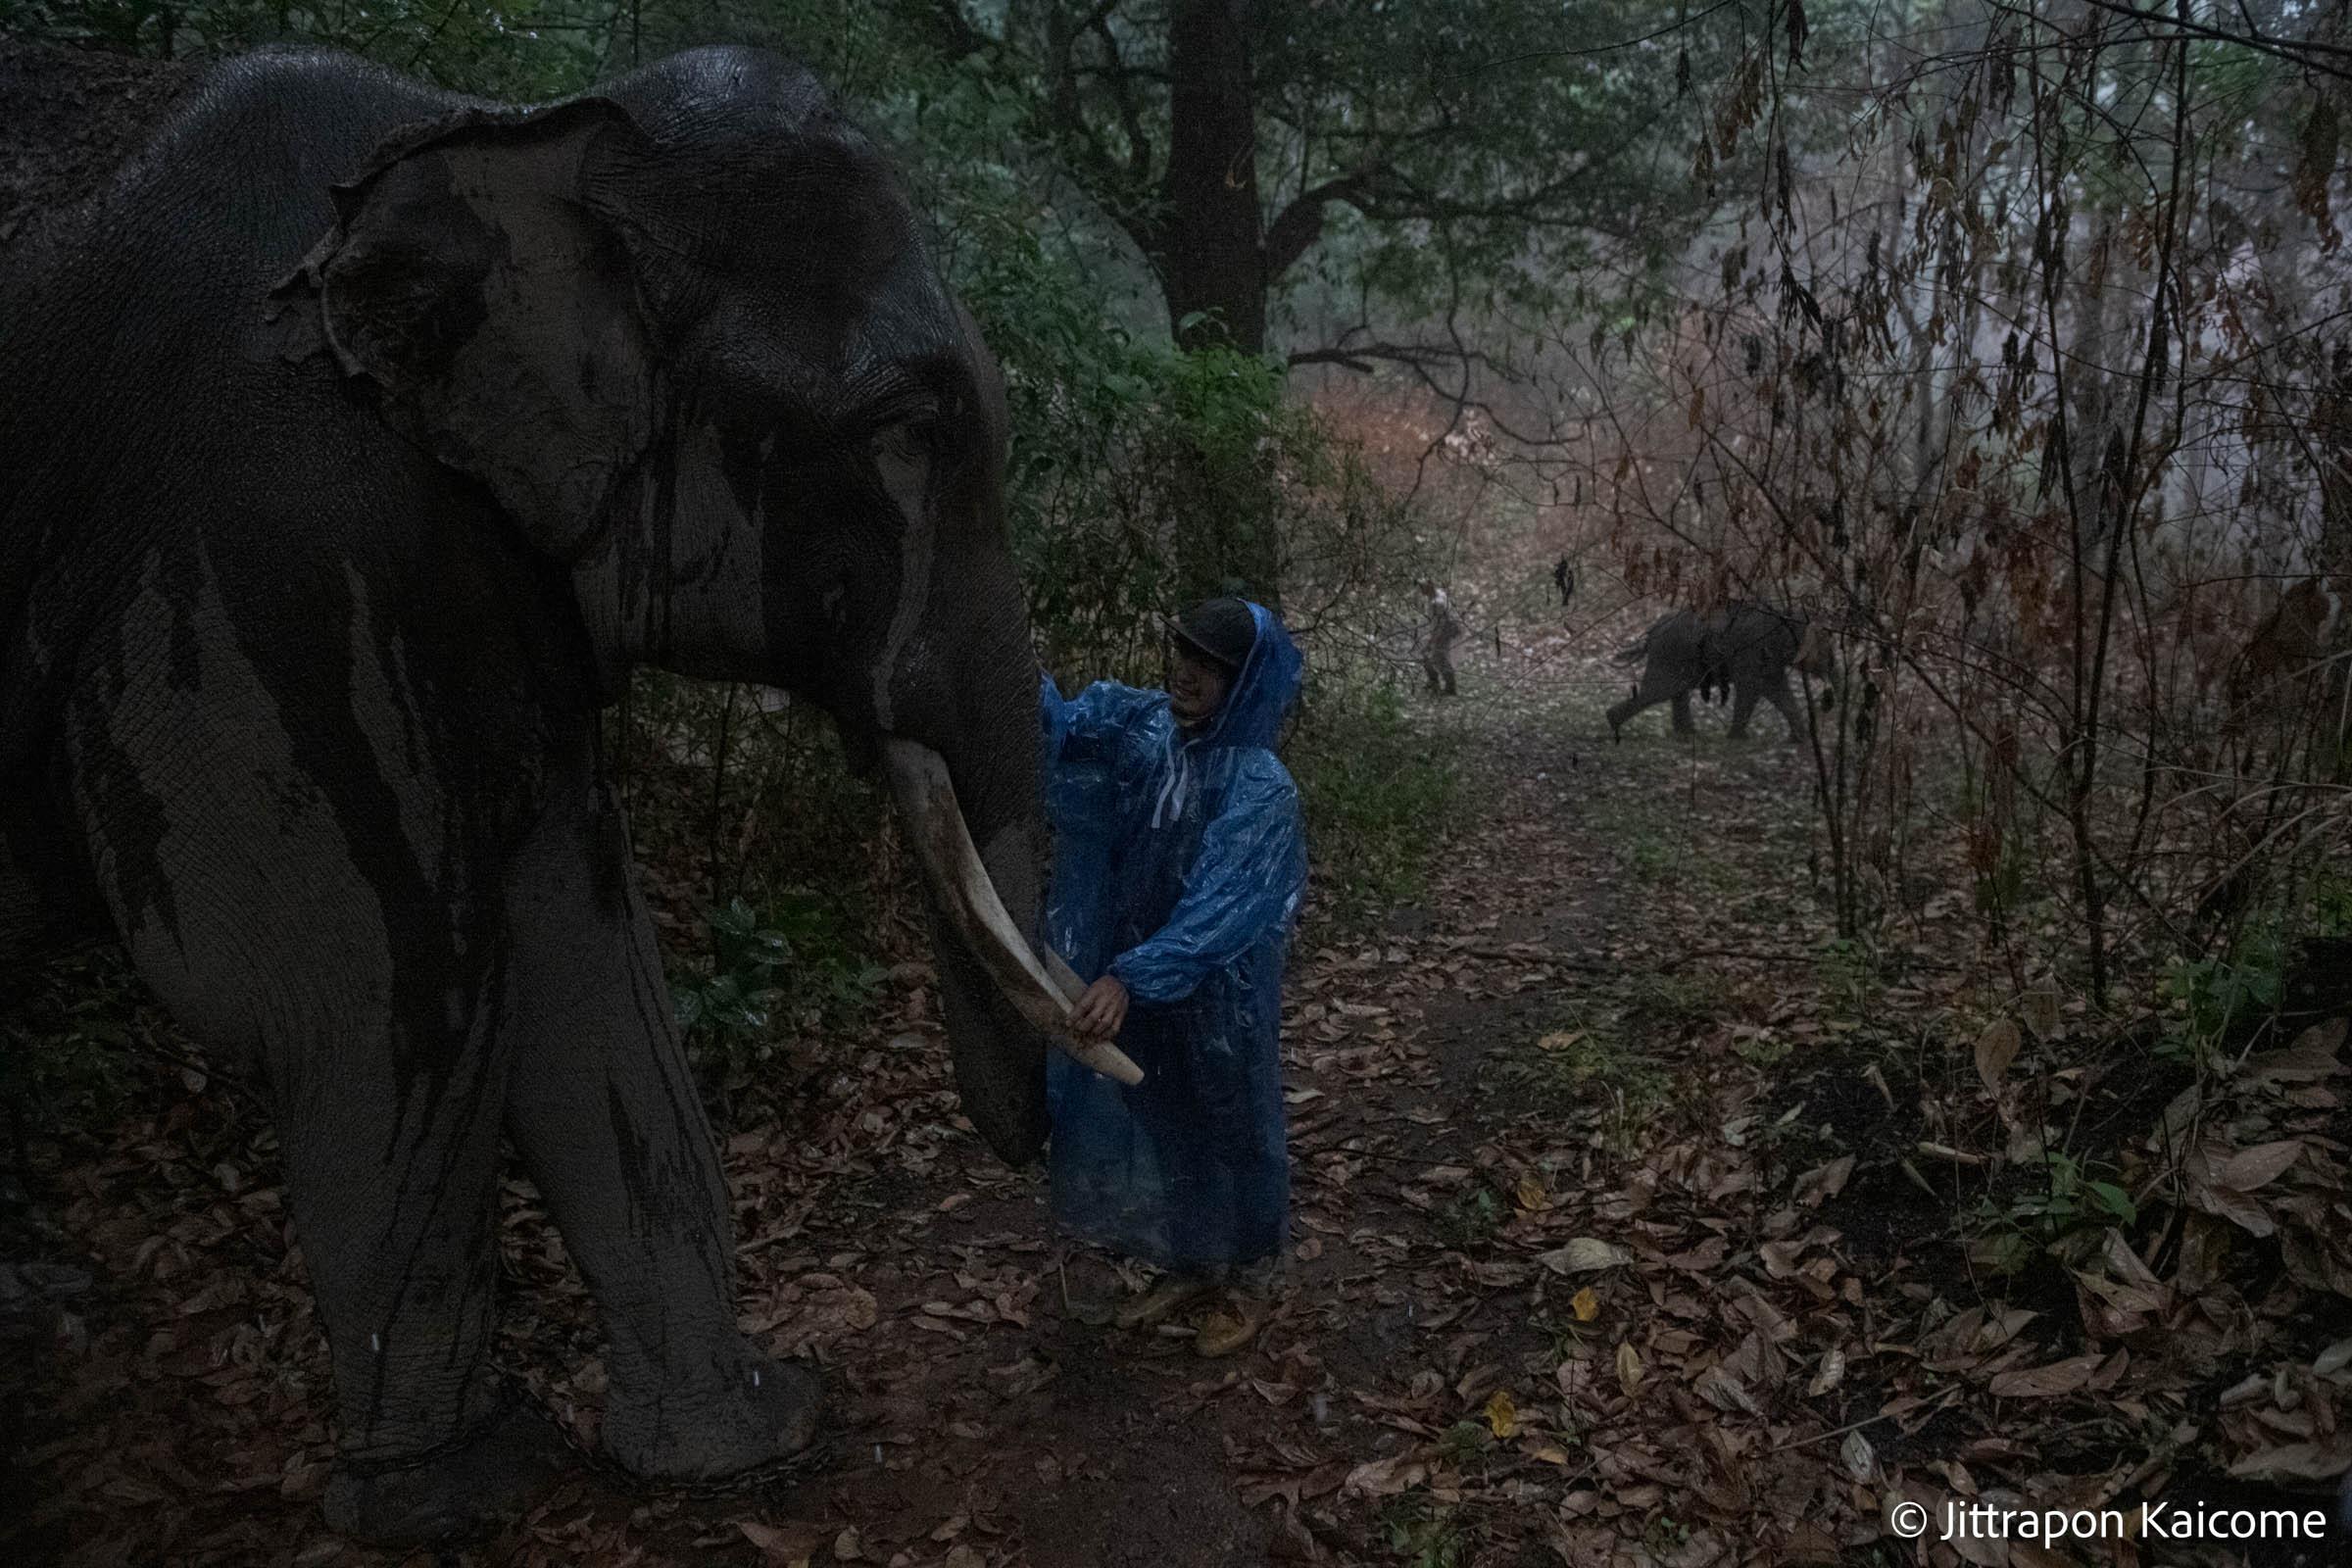 Thailand's Captive Elephants  - In the pouring rain, a mahout comforts his elephants...